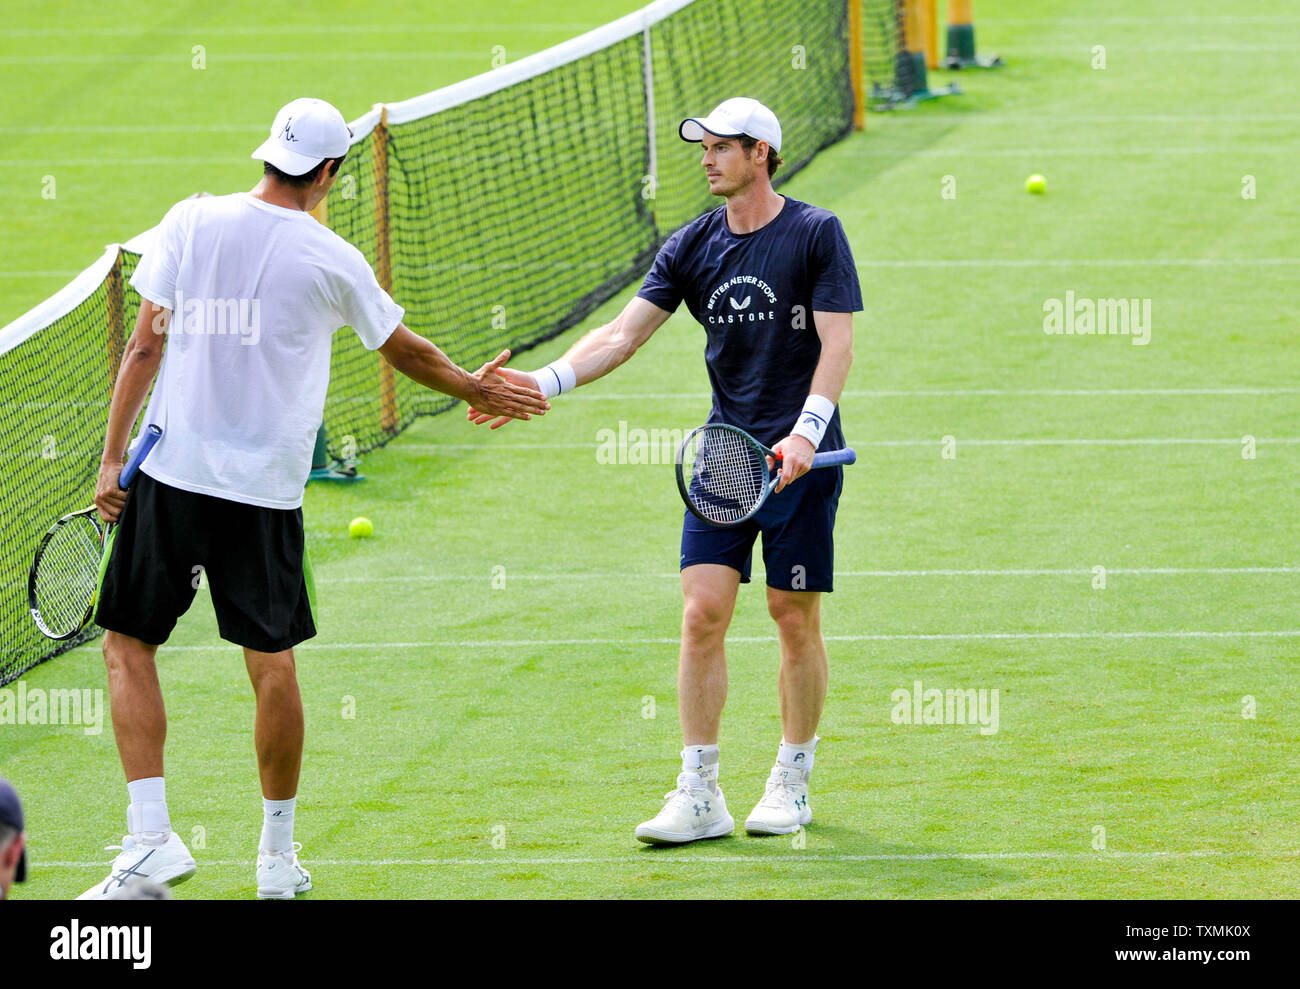 Eastbourne, UK. 25th June, 2019. Andy Murray during a training session before his doubles match later on at the Nature Valley International tennis tournament held at Devonshire Park in Eastbourne . Credit: Simon Dack/Alamy Live News Stock Photo